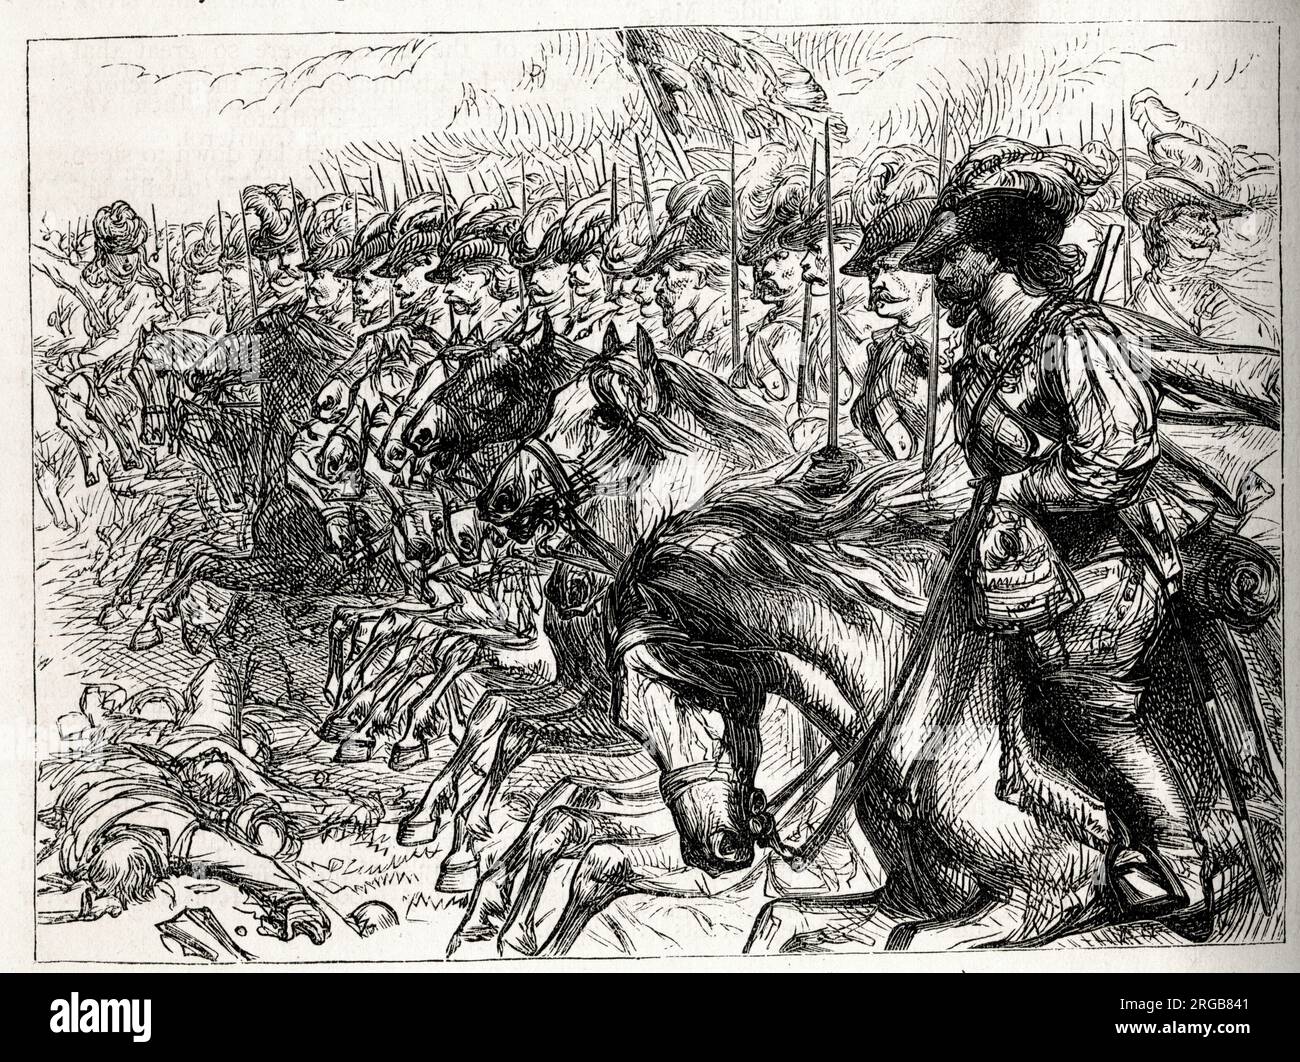 Charge of French cavalry at the Battle of Neerwinden or Landen, in the Spanish Netherlands (present-day Belgium), 29 July 1693, part of the Nine Years' War (1688-1697). Stock Photo